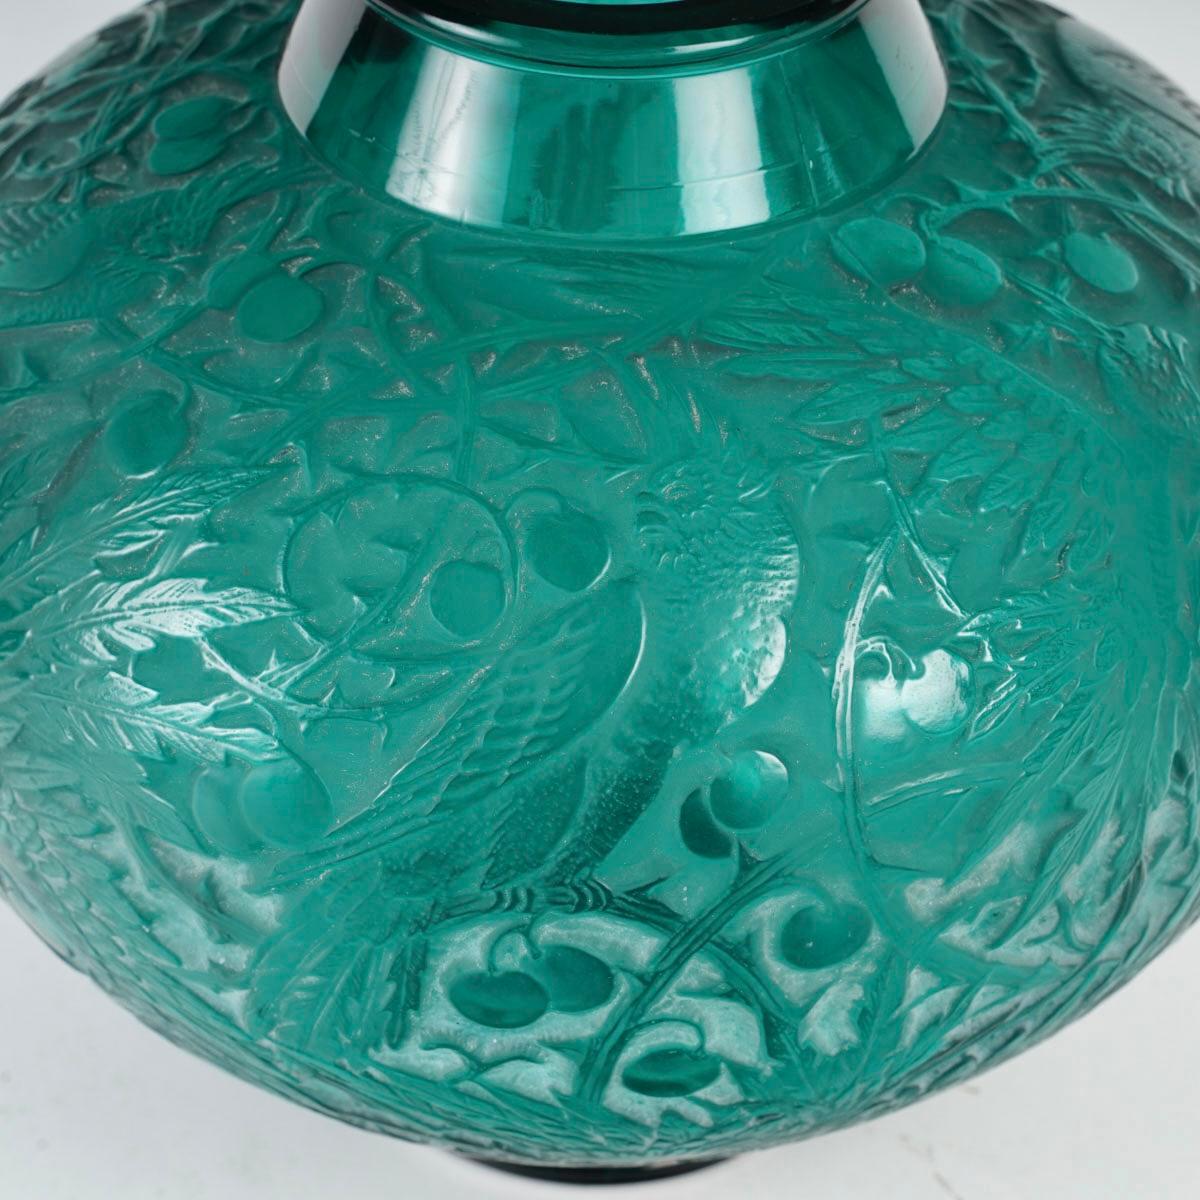 Molded 1924 René Lalique - Vase Aras Teal Green Glass With White Patina Parrots For Sale